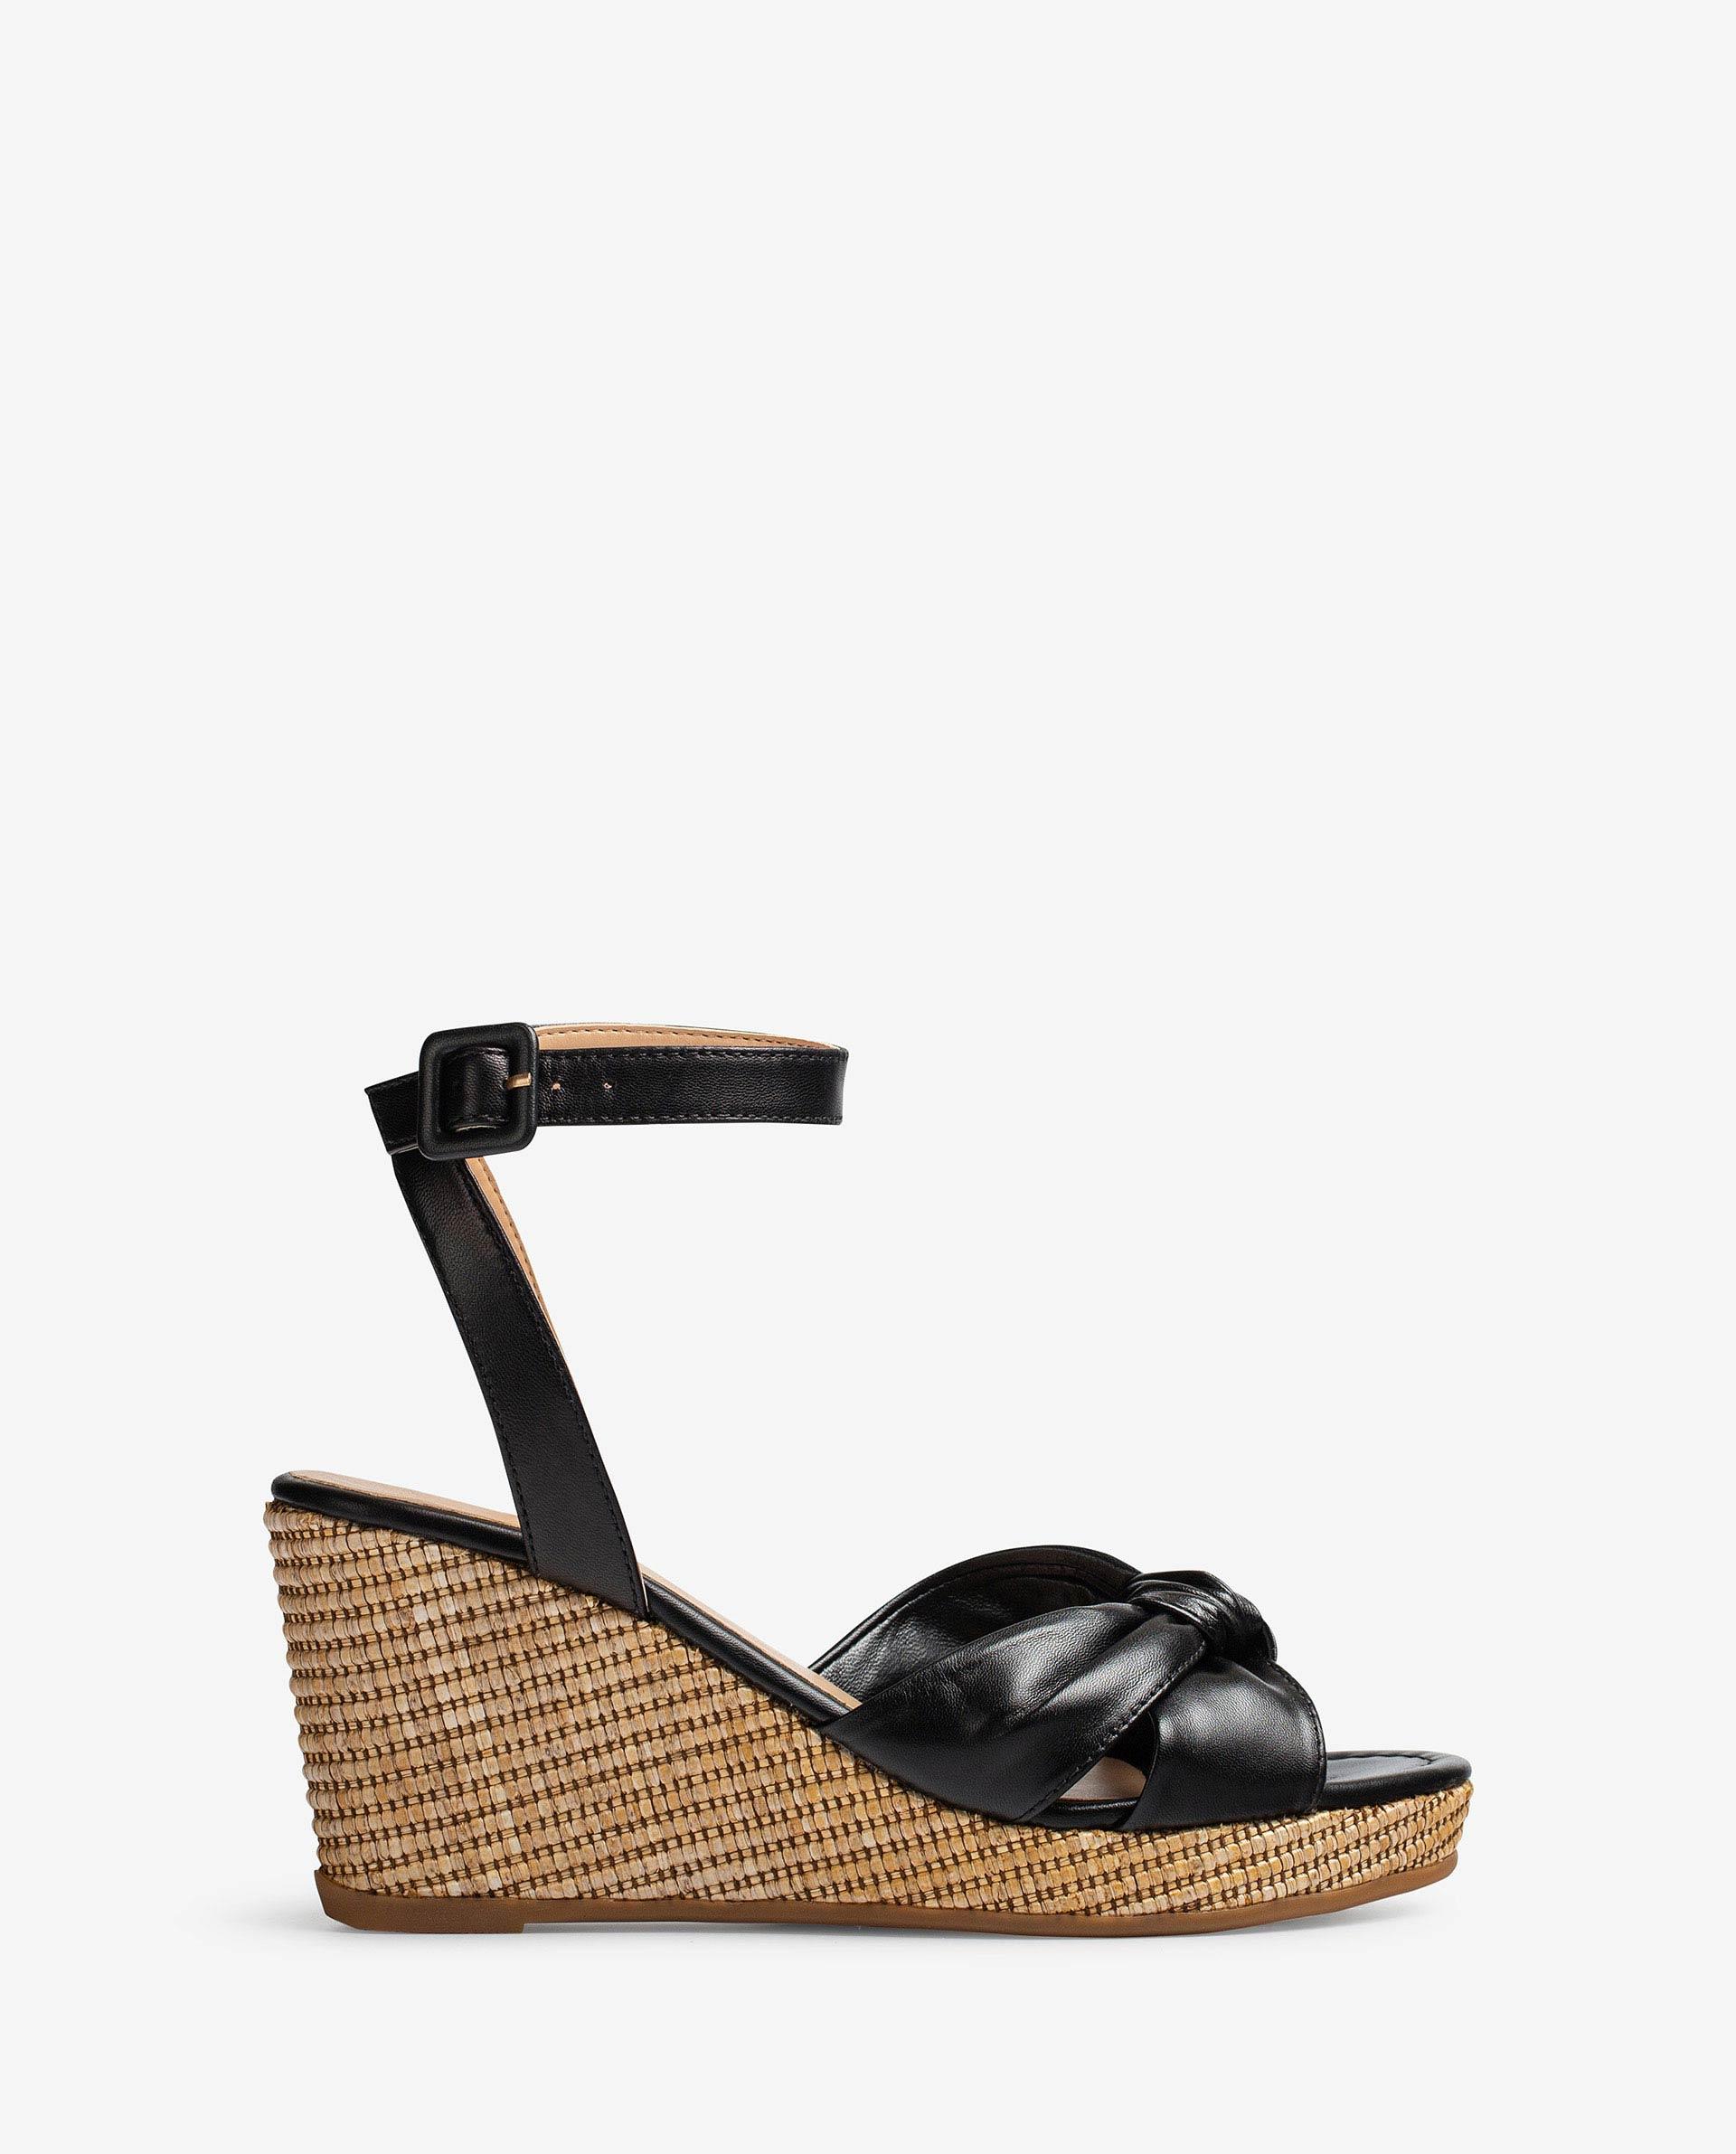 UNISA Leather sandals with straps tied up in a knot LAZKAO_NS 2